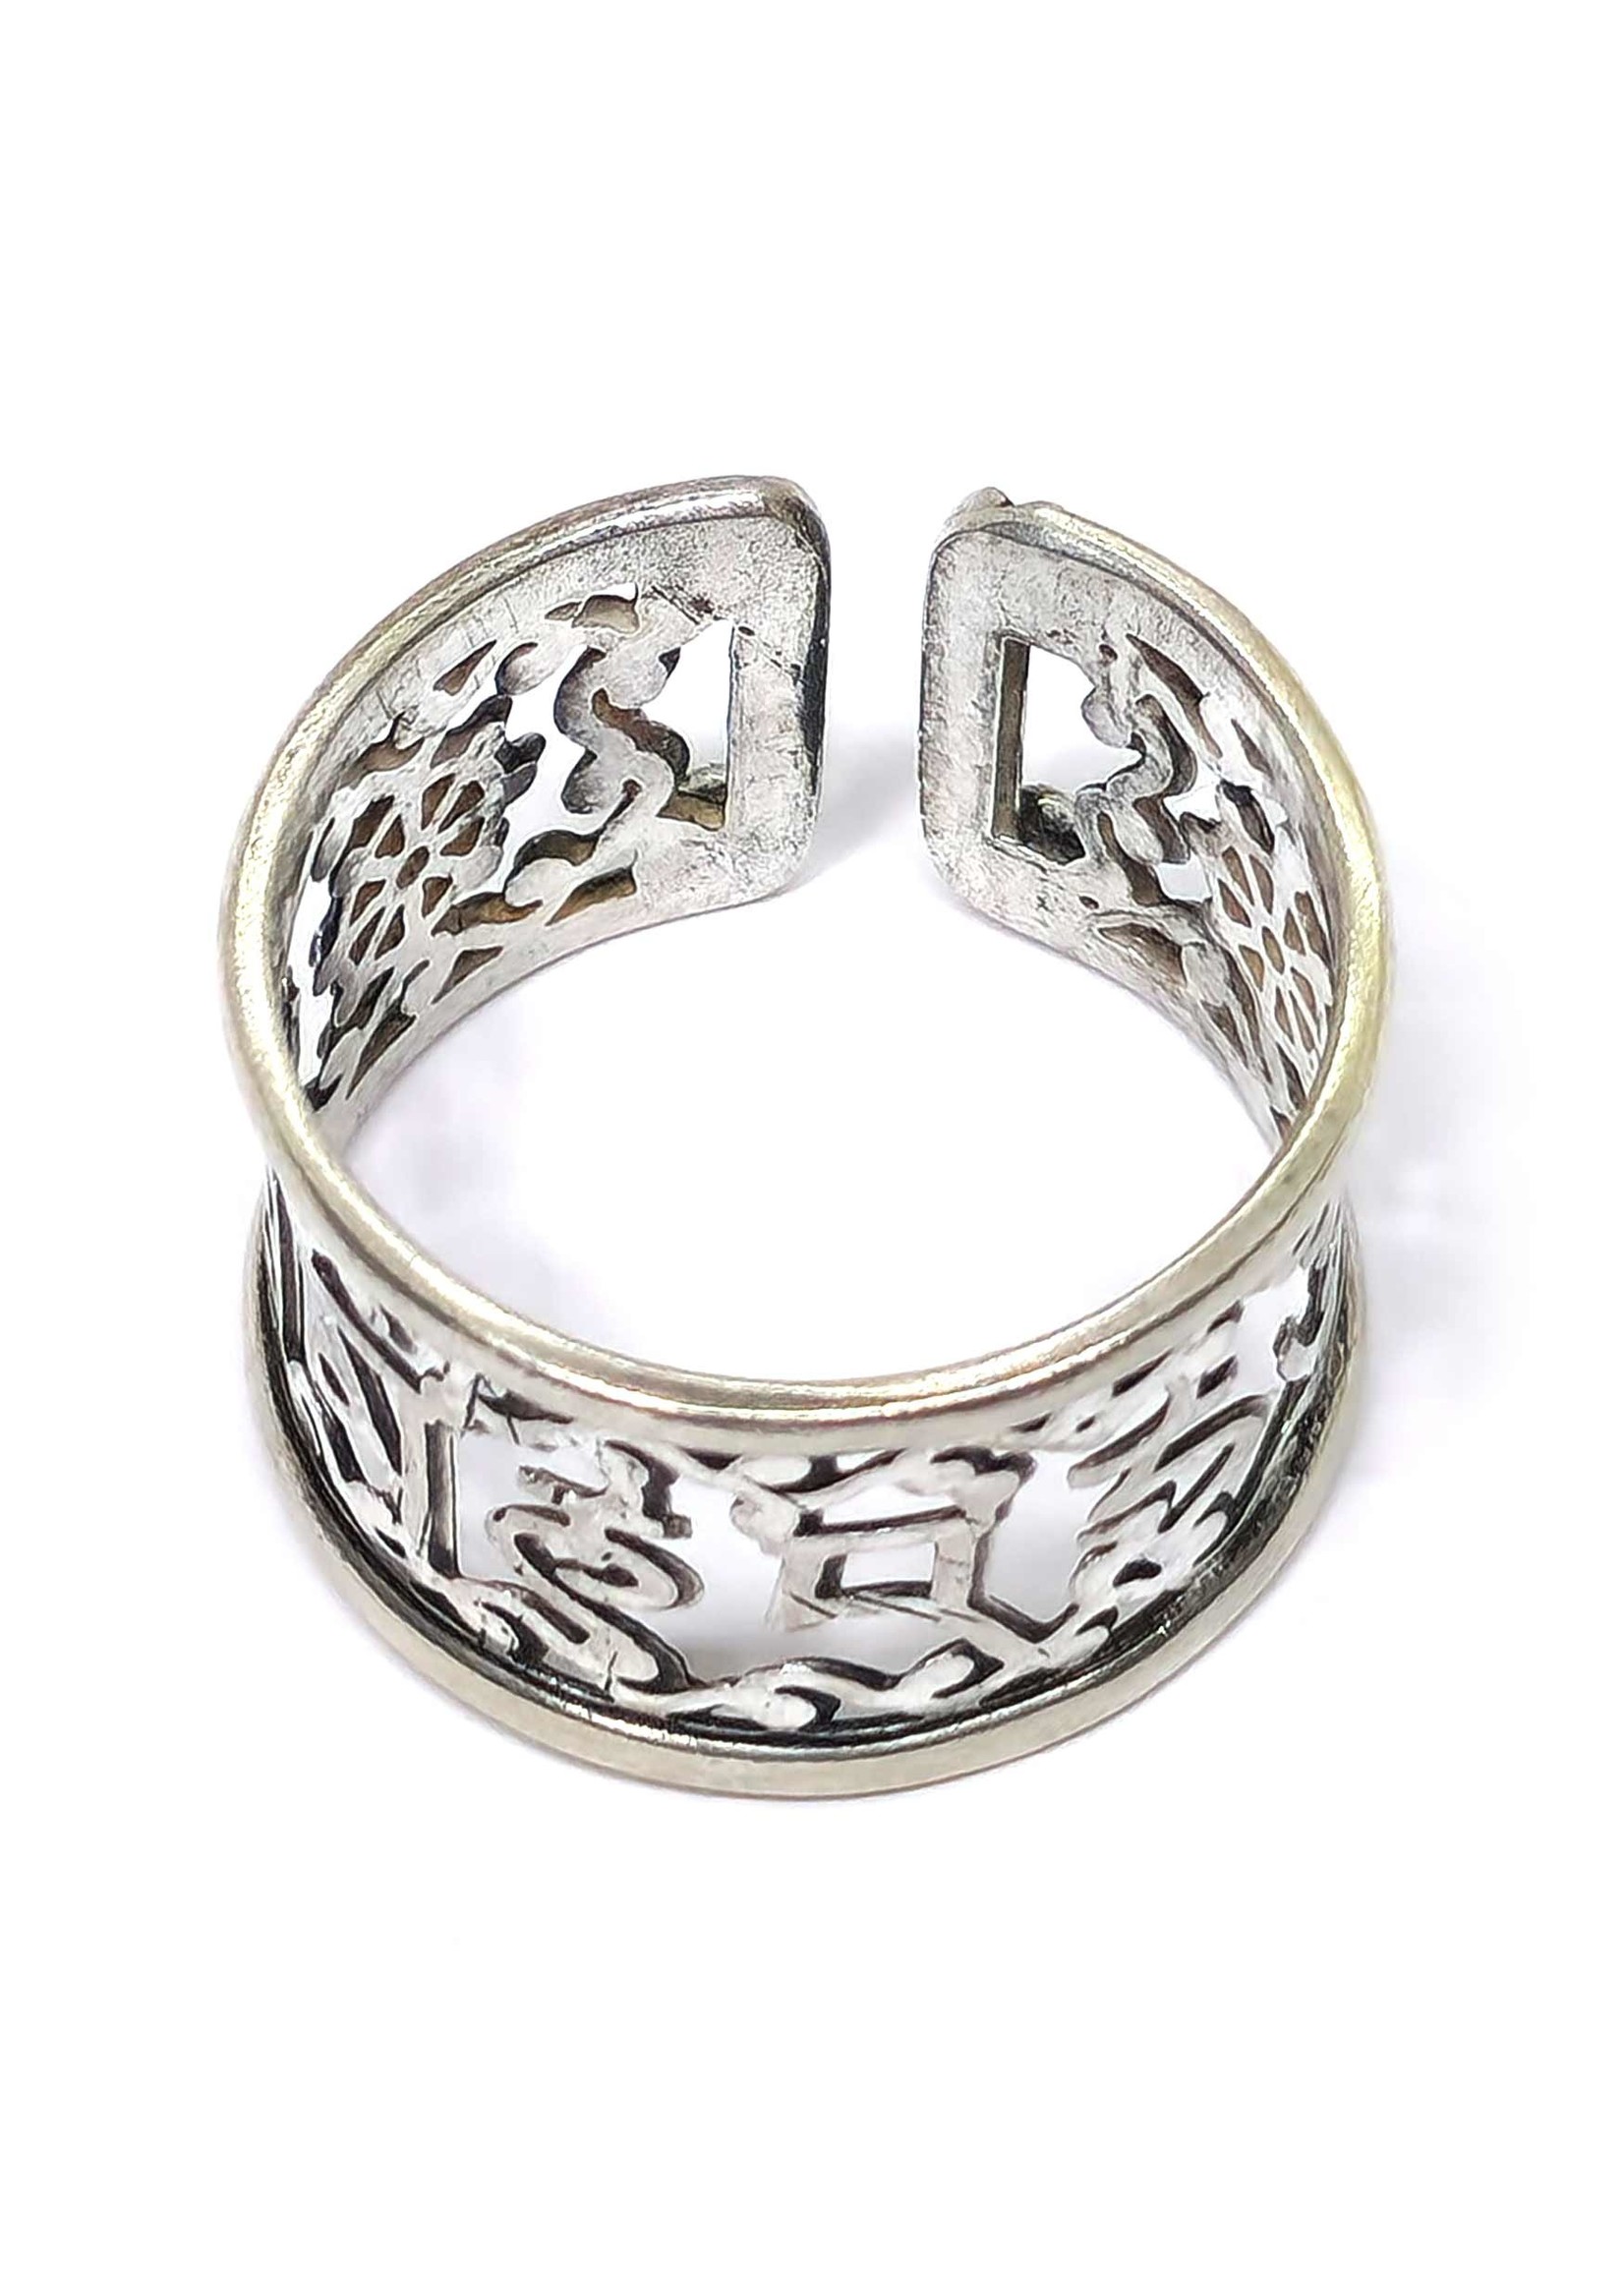 Tibetan Finger Ring With Adjustable Size, Cut Out Mantra "Om Mani Padme Hum"